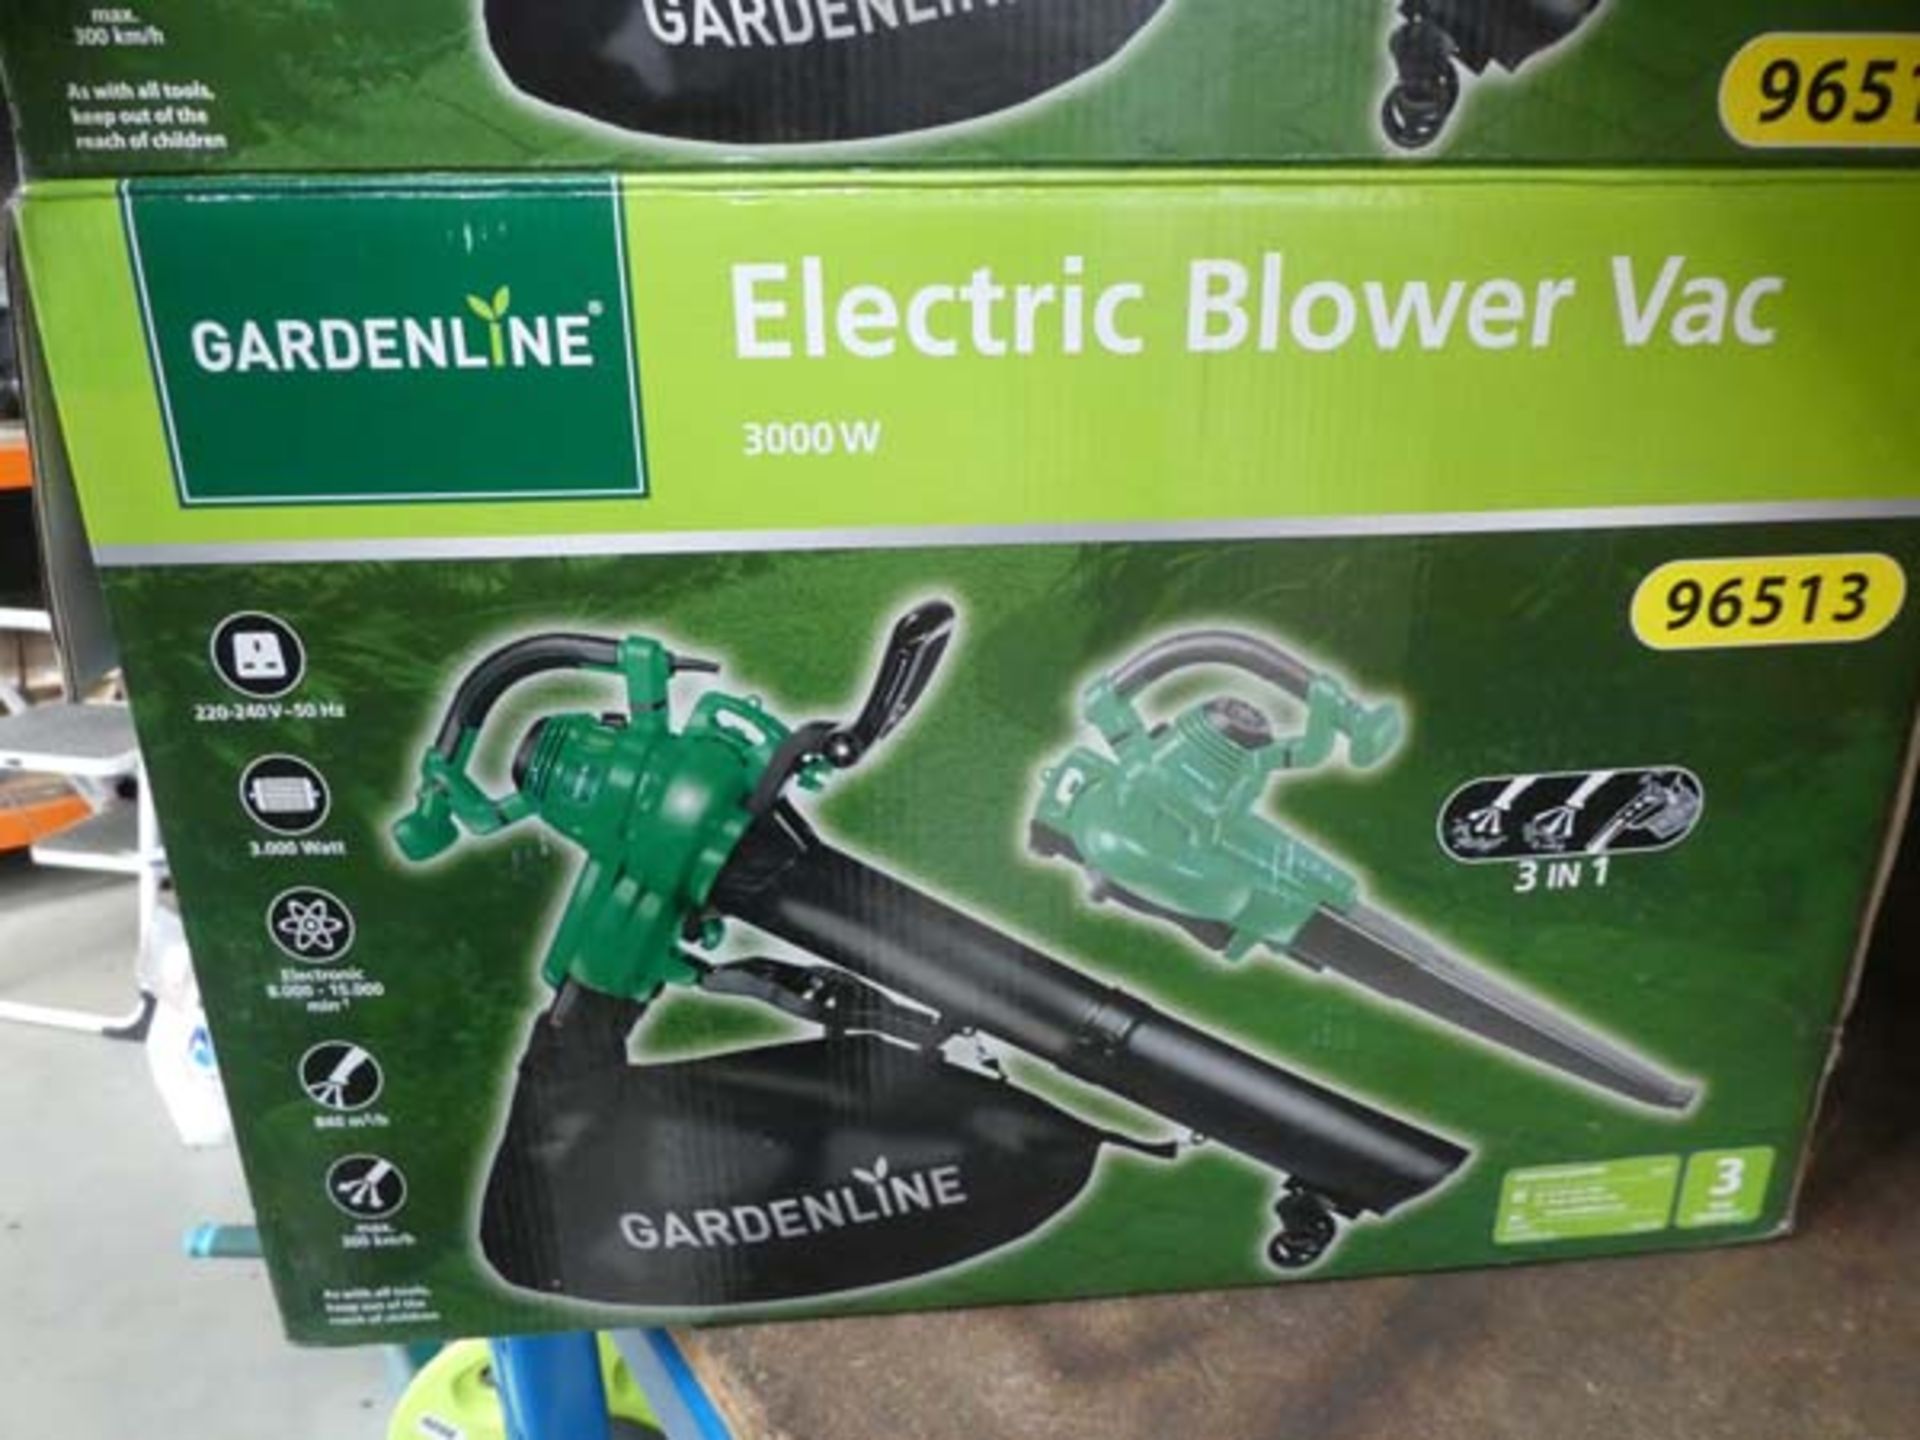 Boxed Gardenline electric blow vac